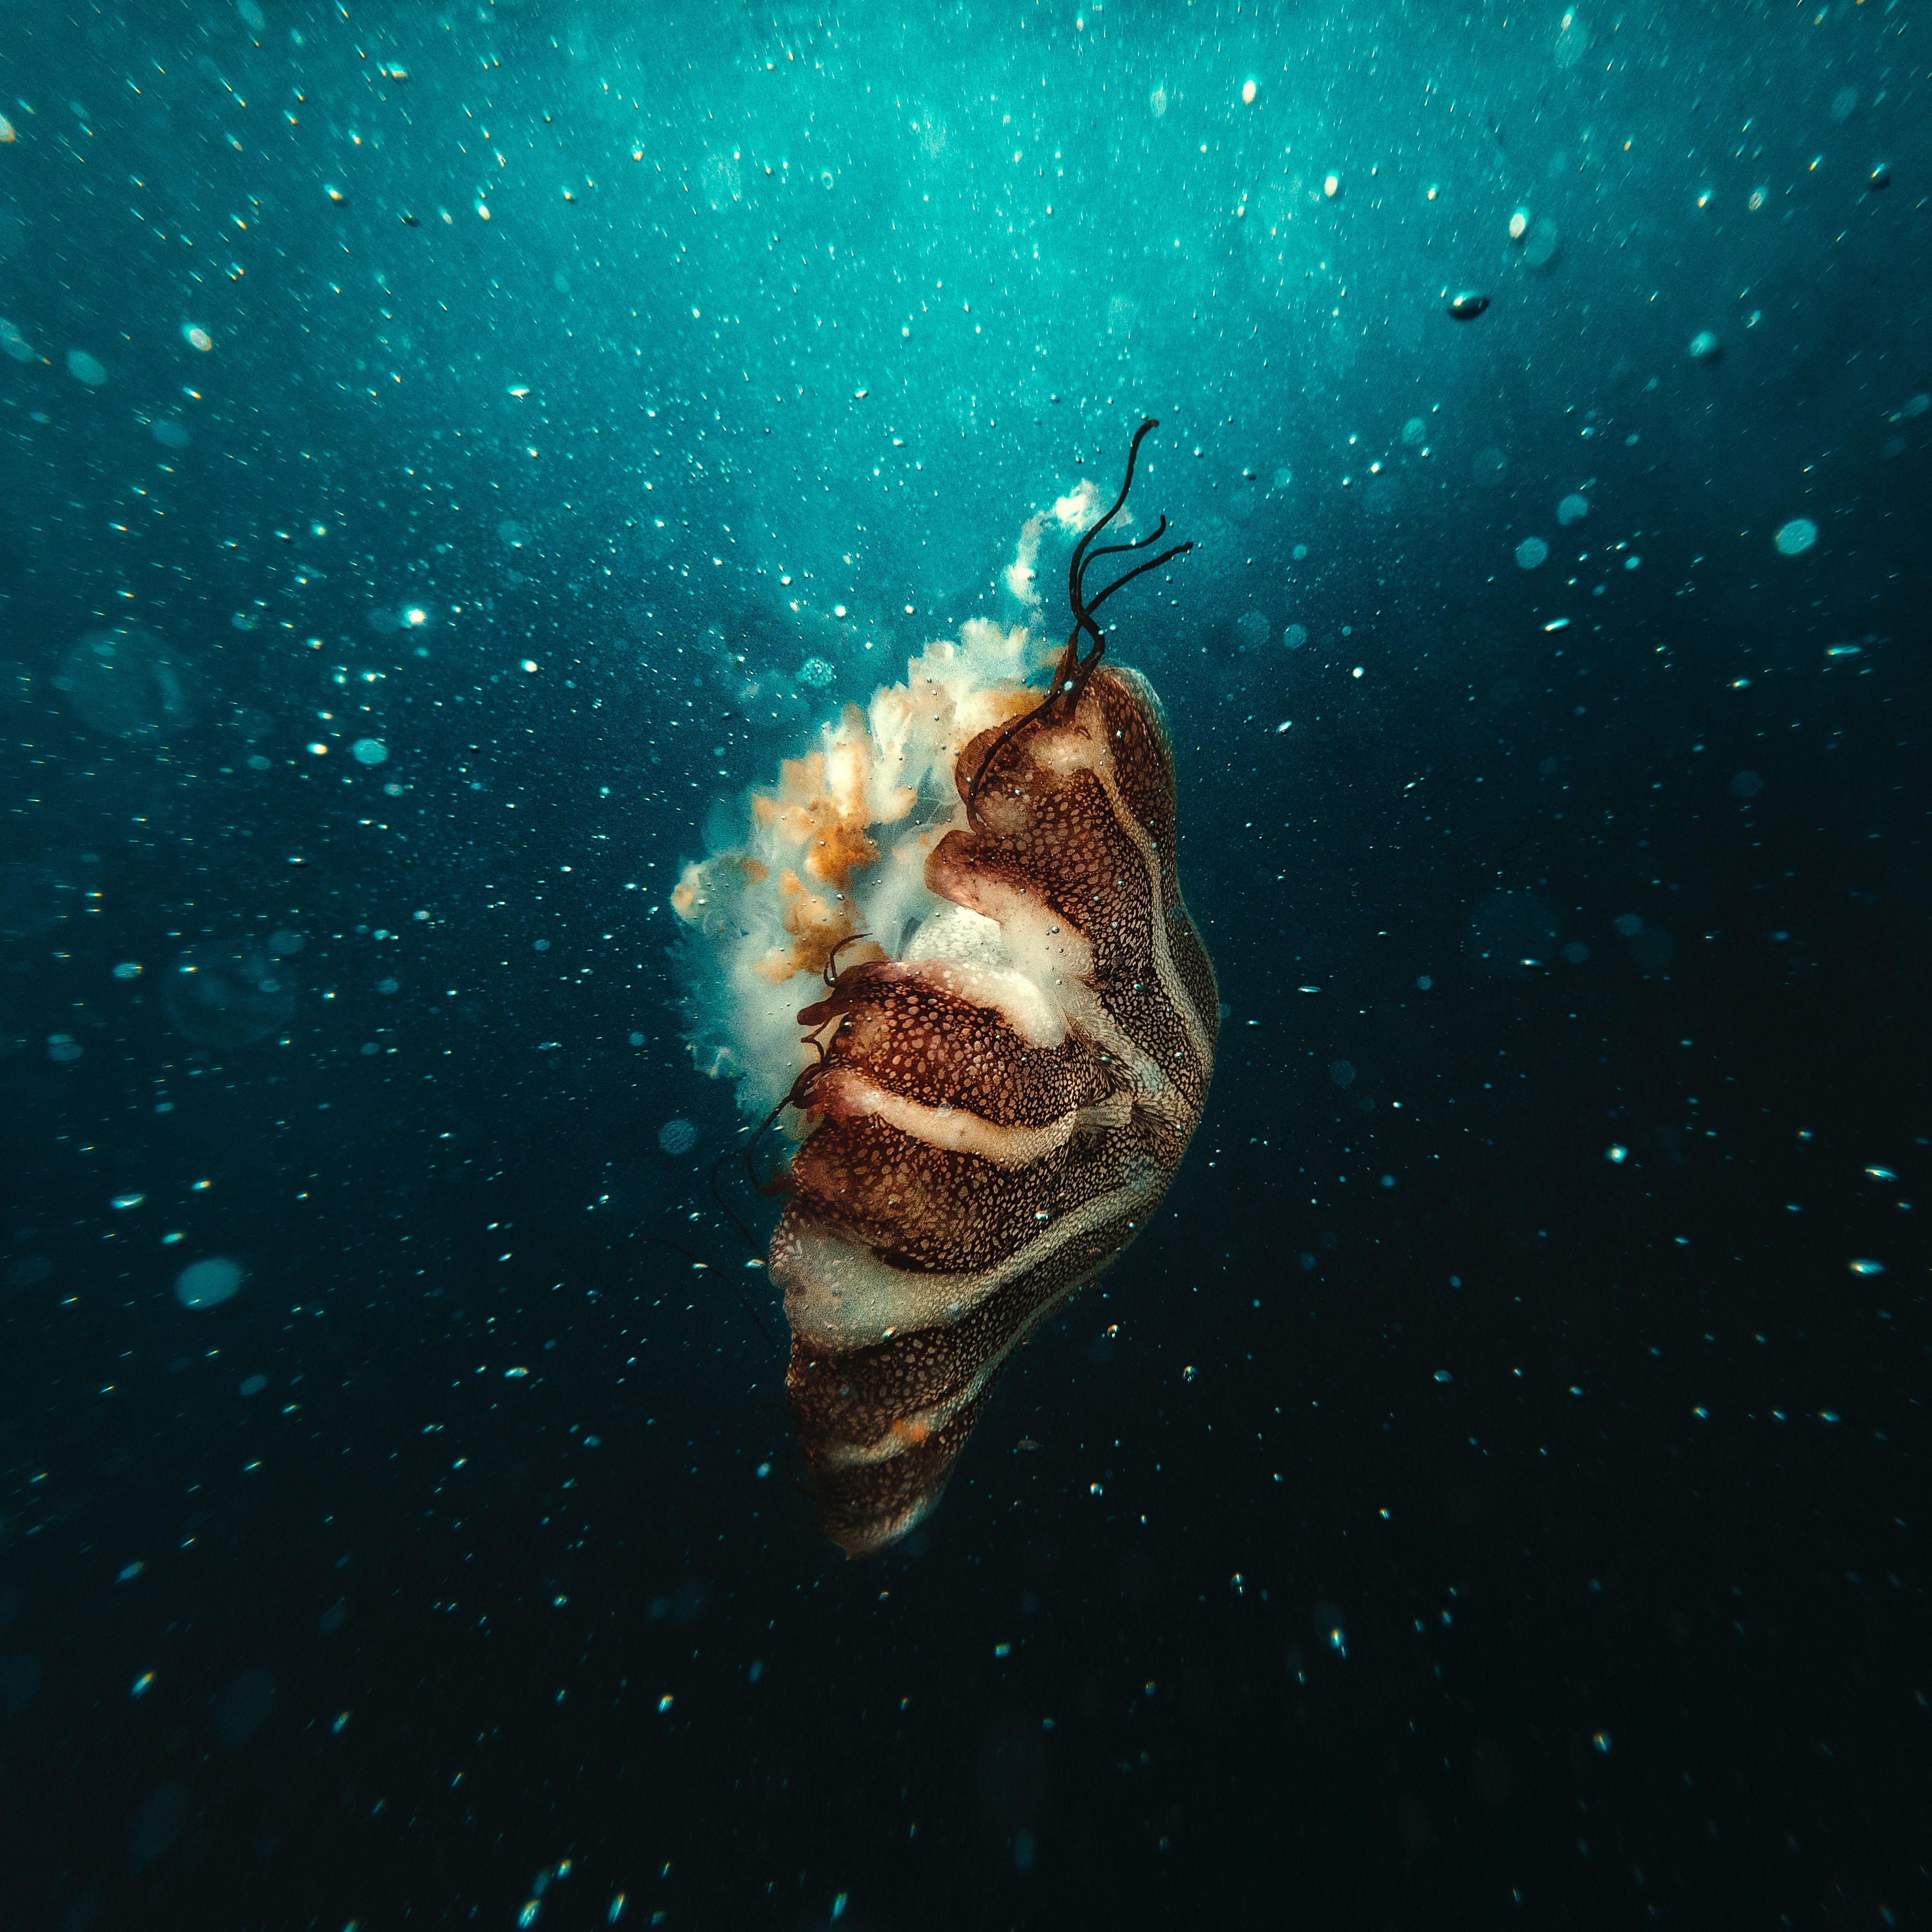 147670 Screensavers and Wallpapers Underwater for phone. Download animals, bubbles, jellyfish, underwater world, under water, underwater pictures for free